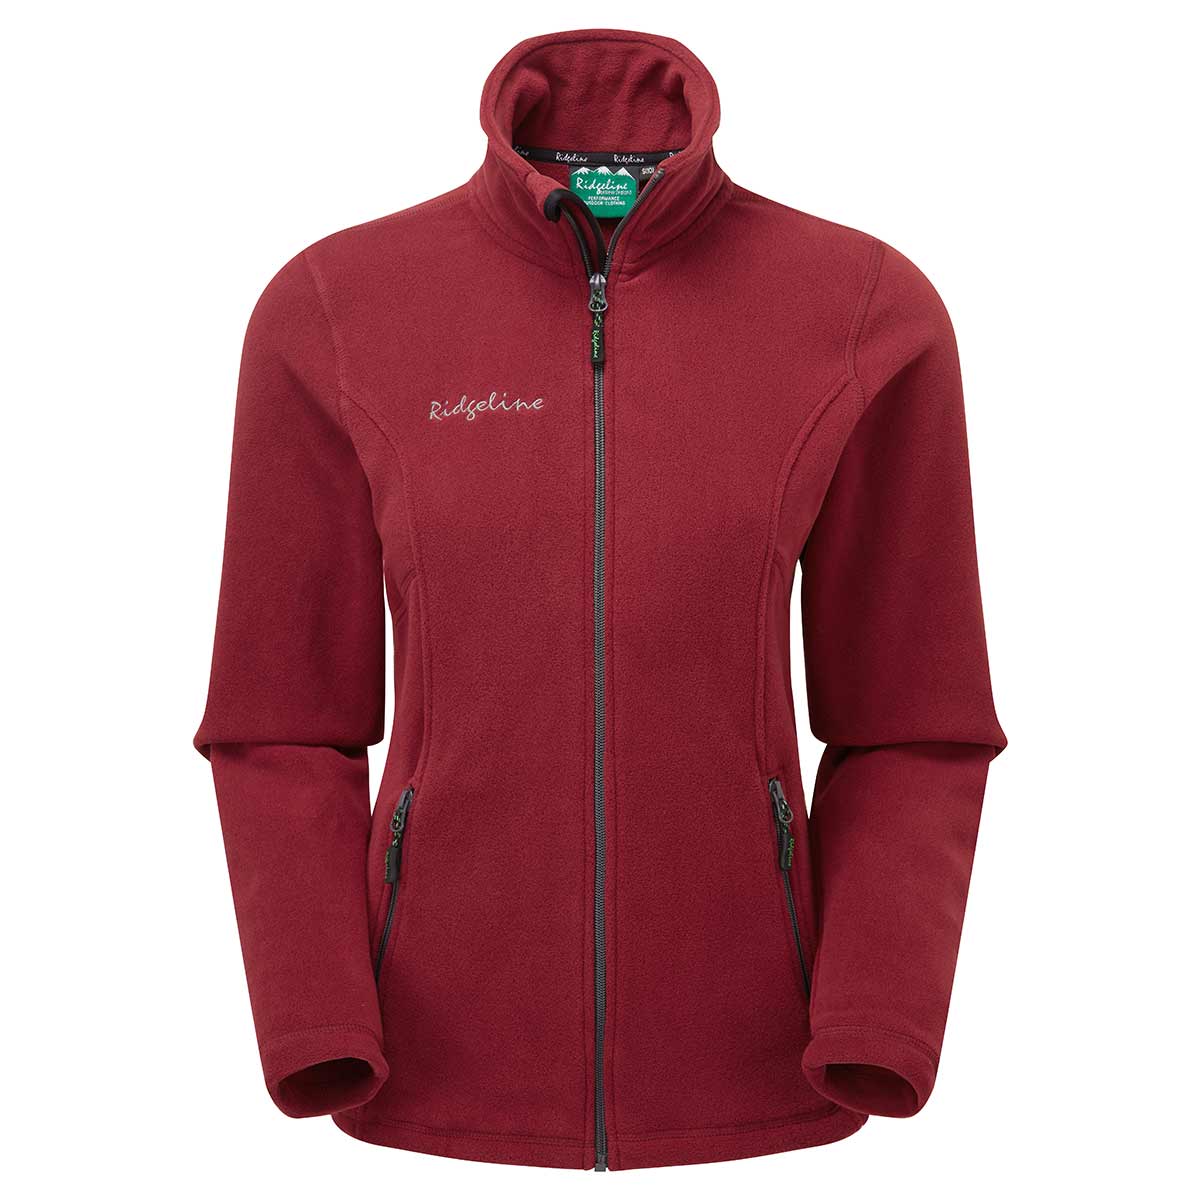  Under Armour Outerwear Women's New Extreme CG Top